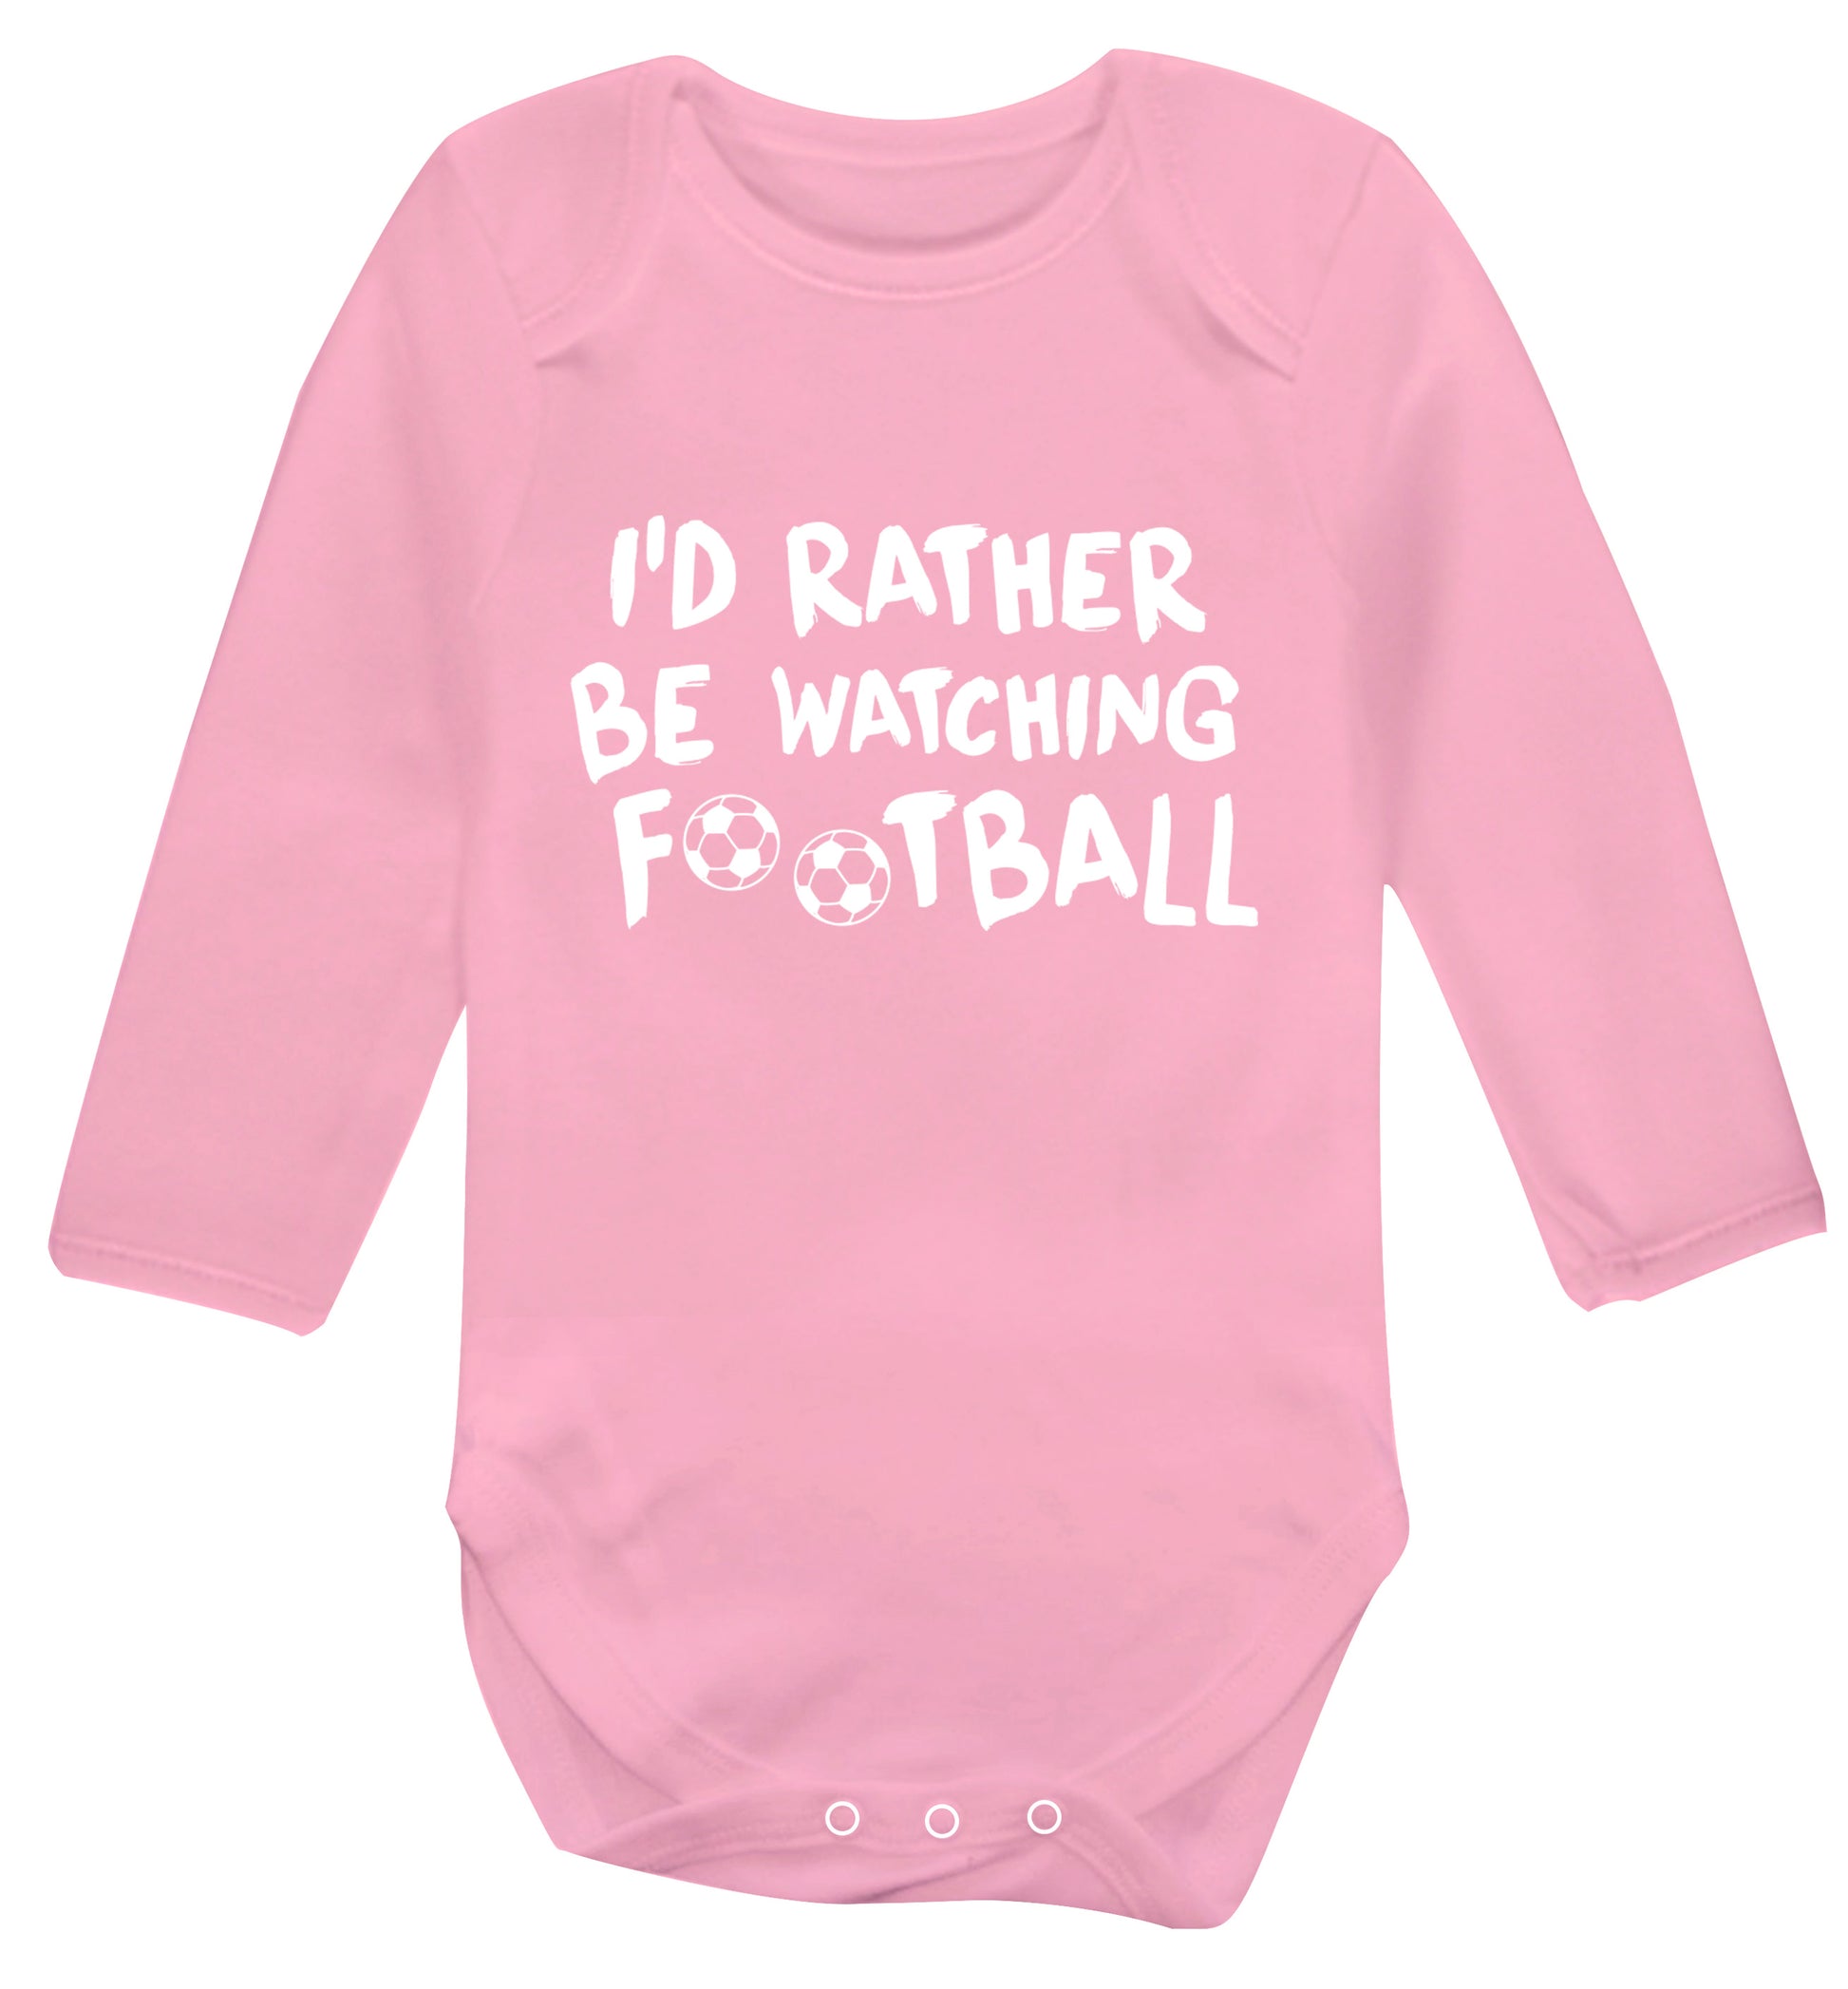 I'd rather be watching football Baby Vest long sleeved pale pink 6-12 months